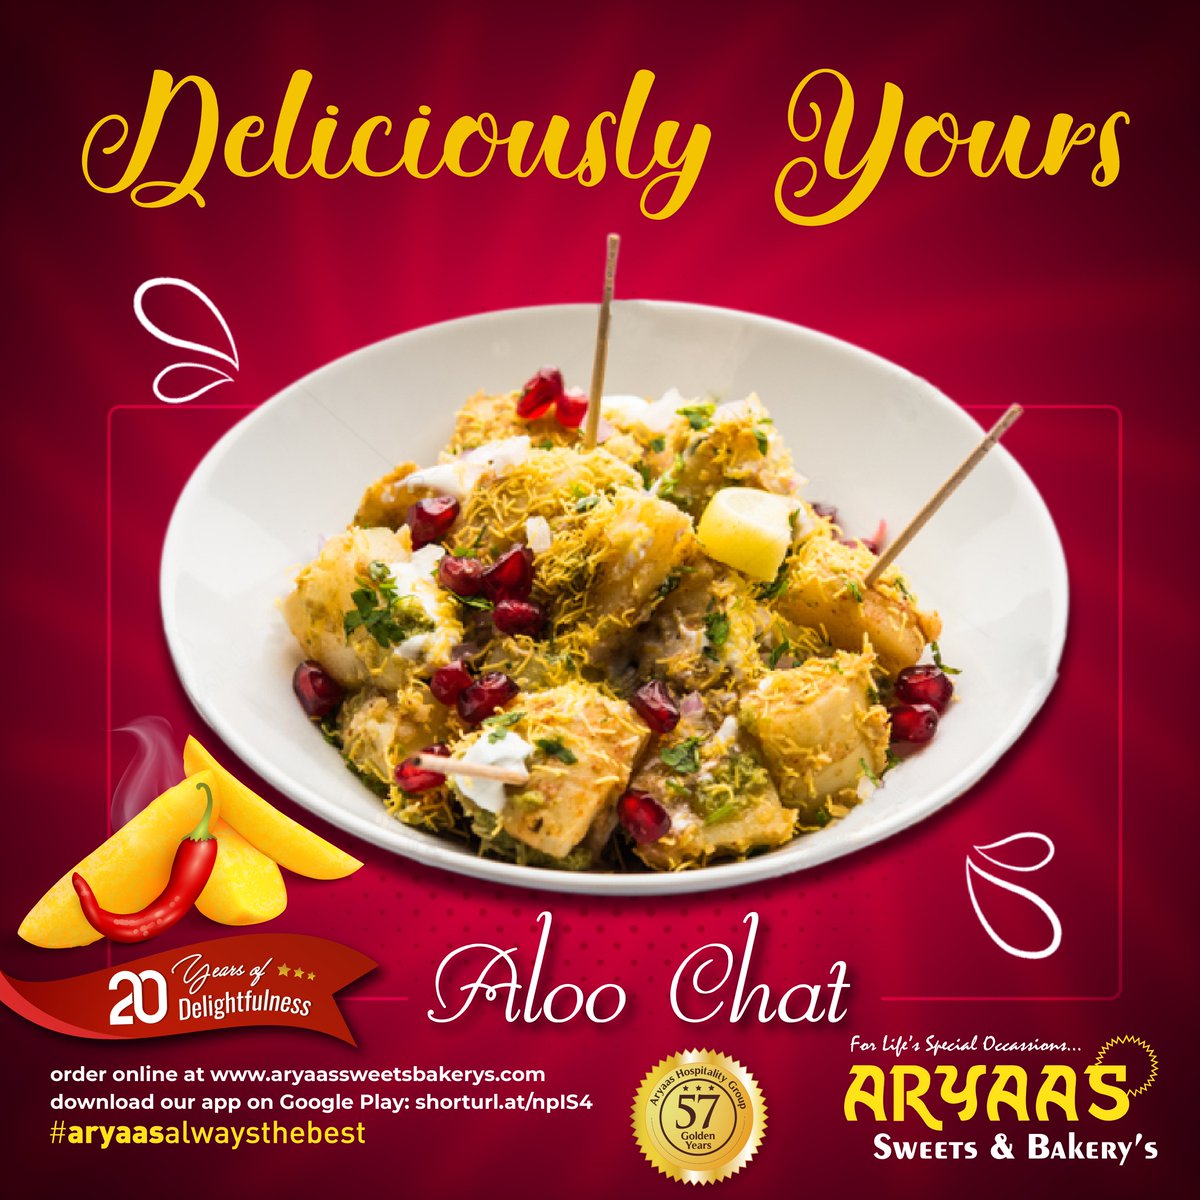 A delicious and wholesome evening snack - Aloo Chat! Now available at all outlets of #AryaasSweetsAndBakeries betwee 4 p.m. and 9 p.m. 

#aryaasalwaysthebest 
#IndianChat #StreetFood #ChatFood #MumbaiStreetFood